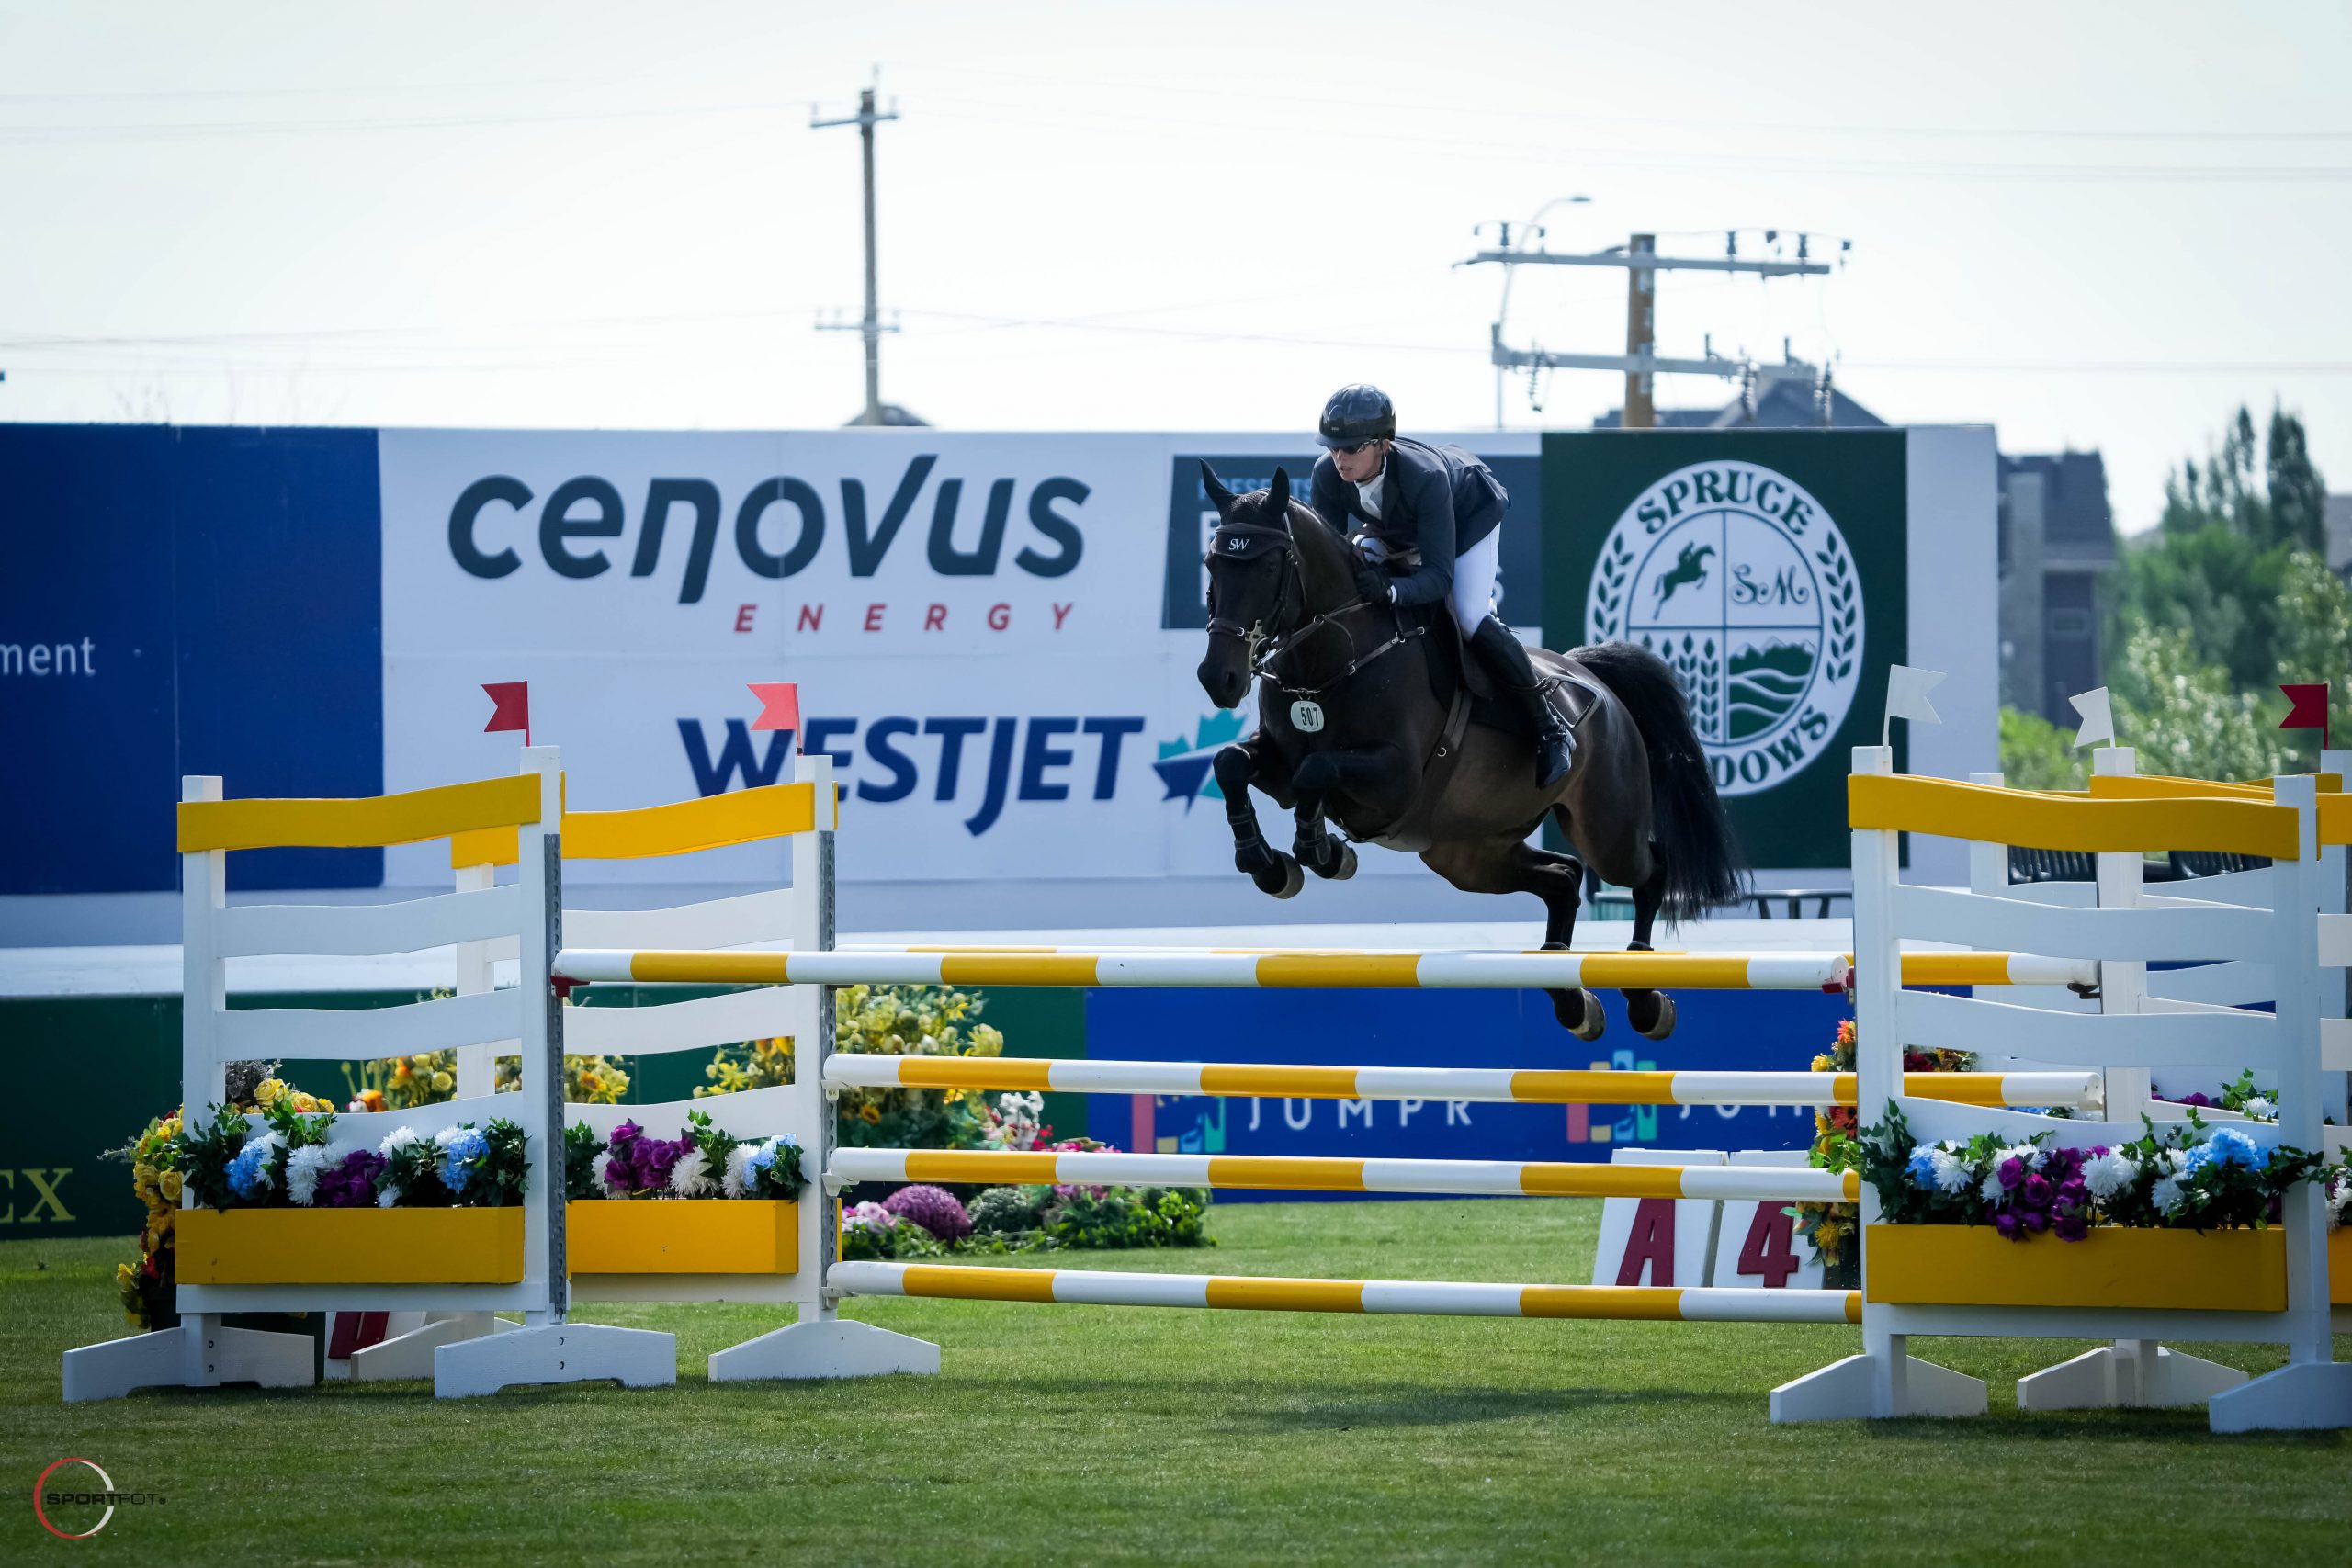 Another double clear round for Starkato and Sam Walker in the 1.35m class at Spruce Meadows